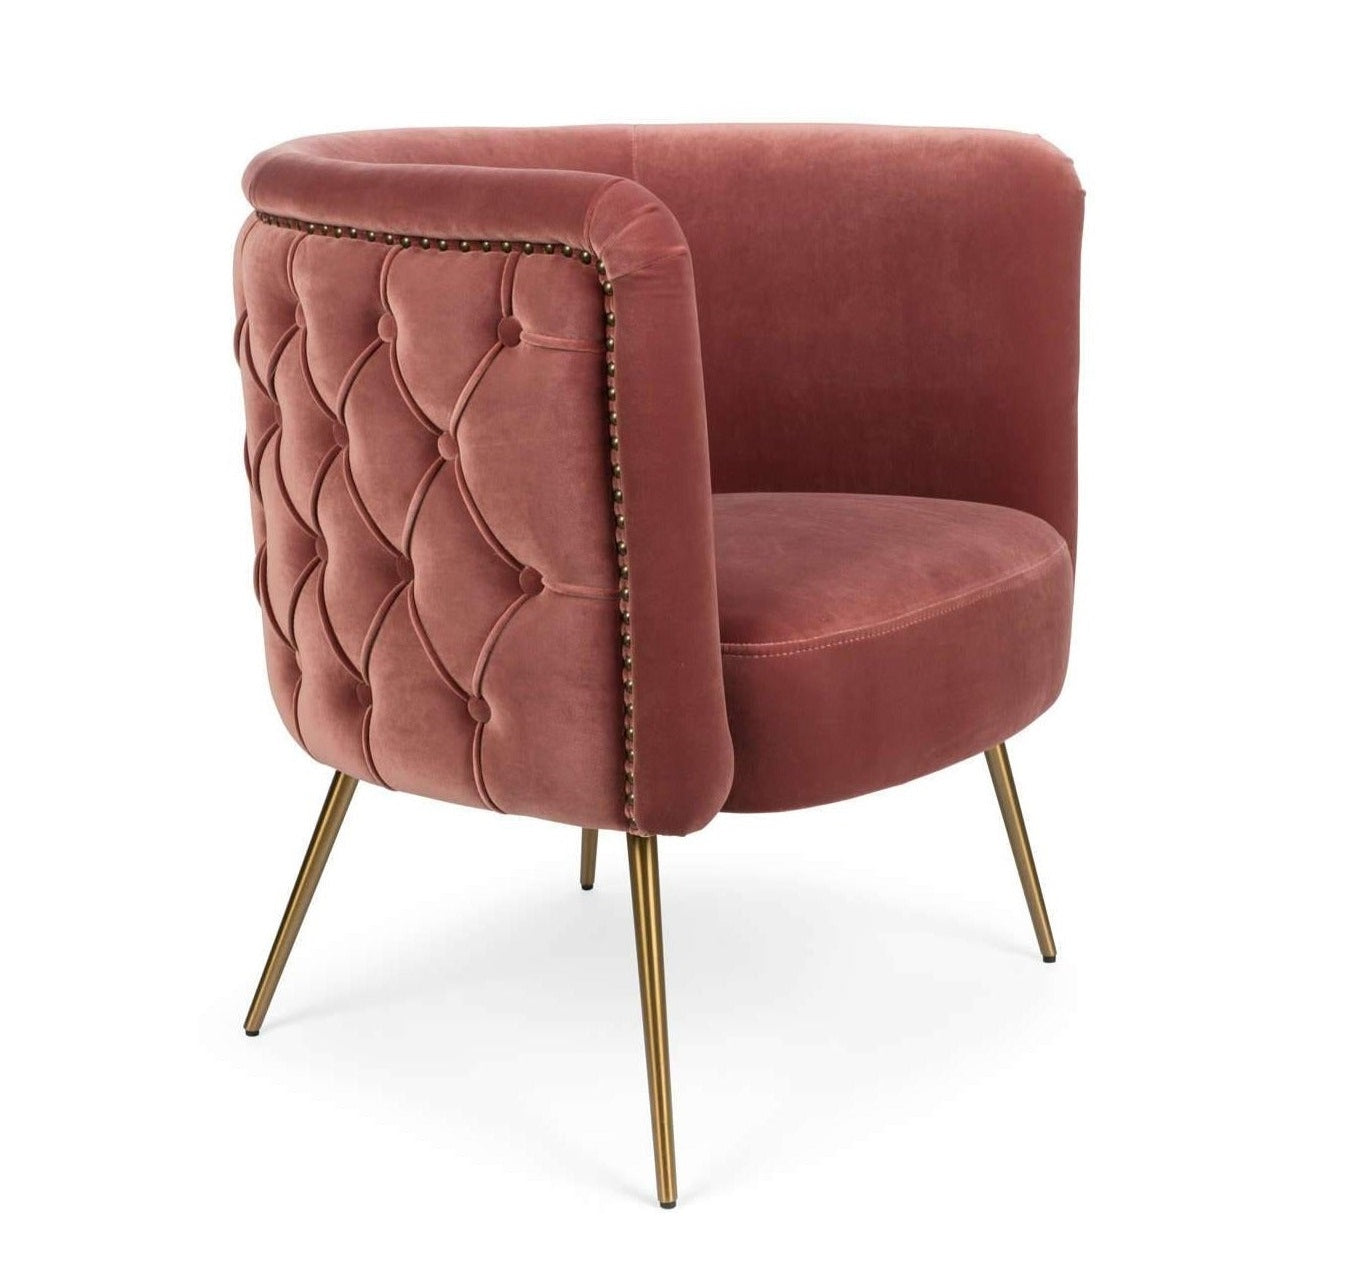 SUCH A STUD lounge chair pink, Bold Monkey, Eye on Design